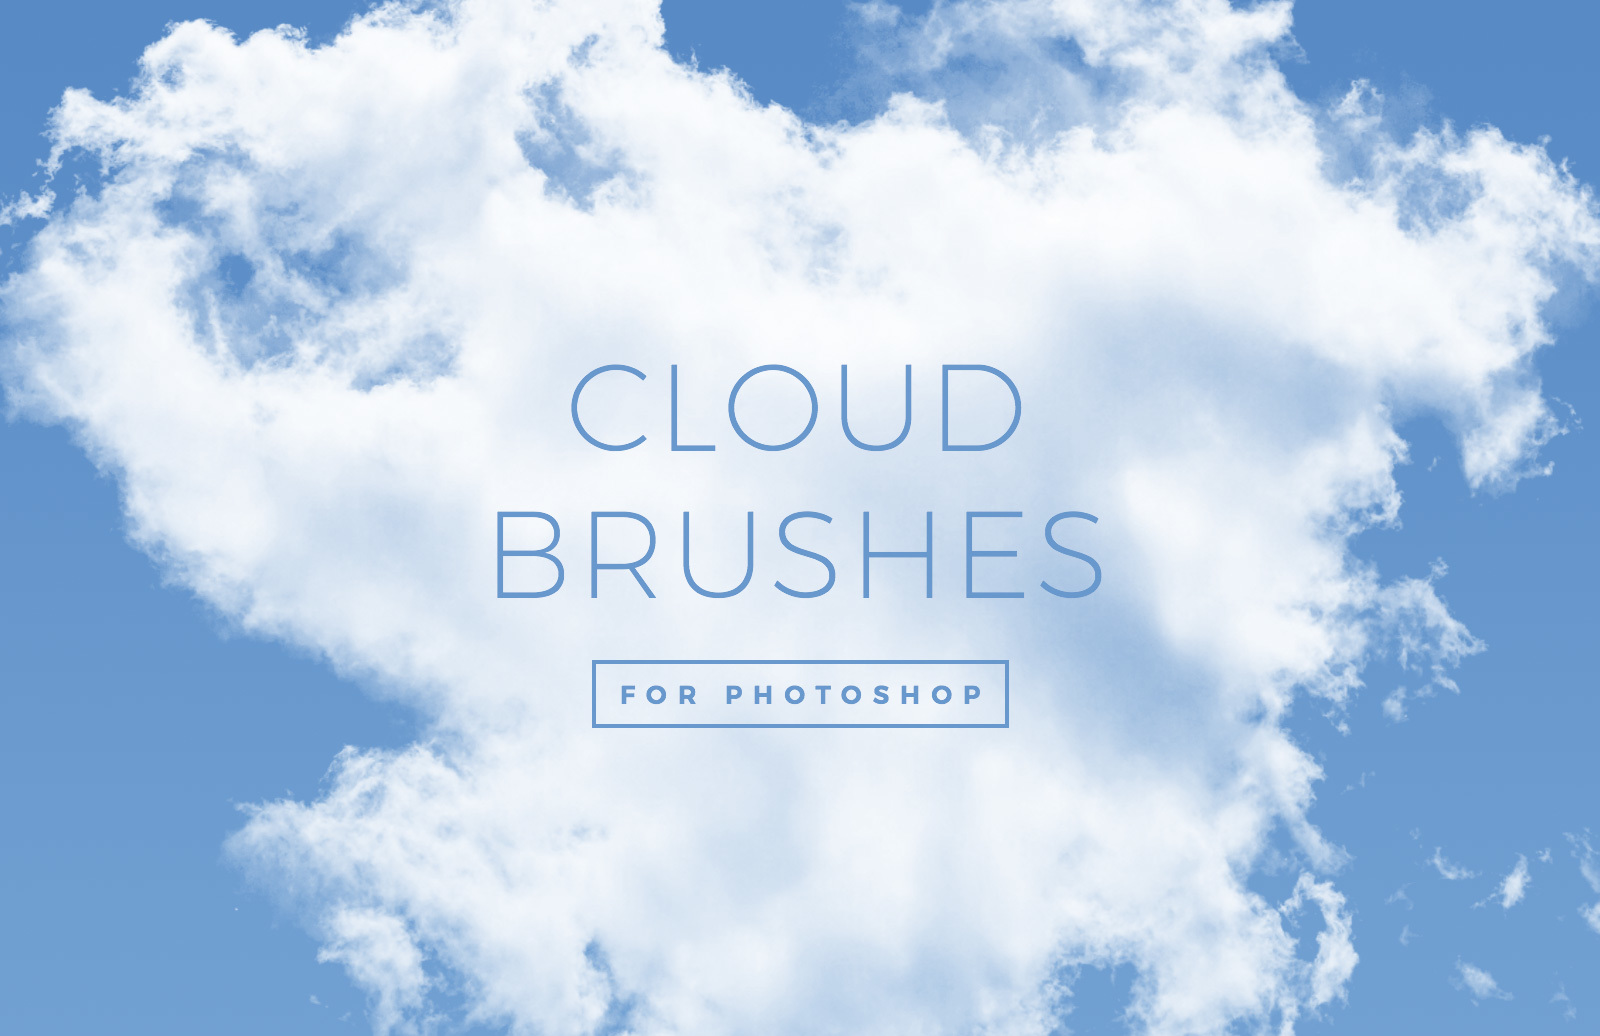 30 Cloud  Brushes  for Photoshop   Medialoot